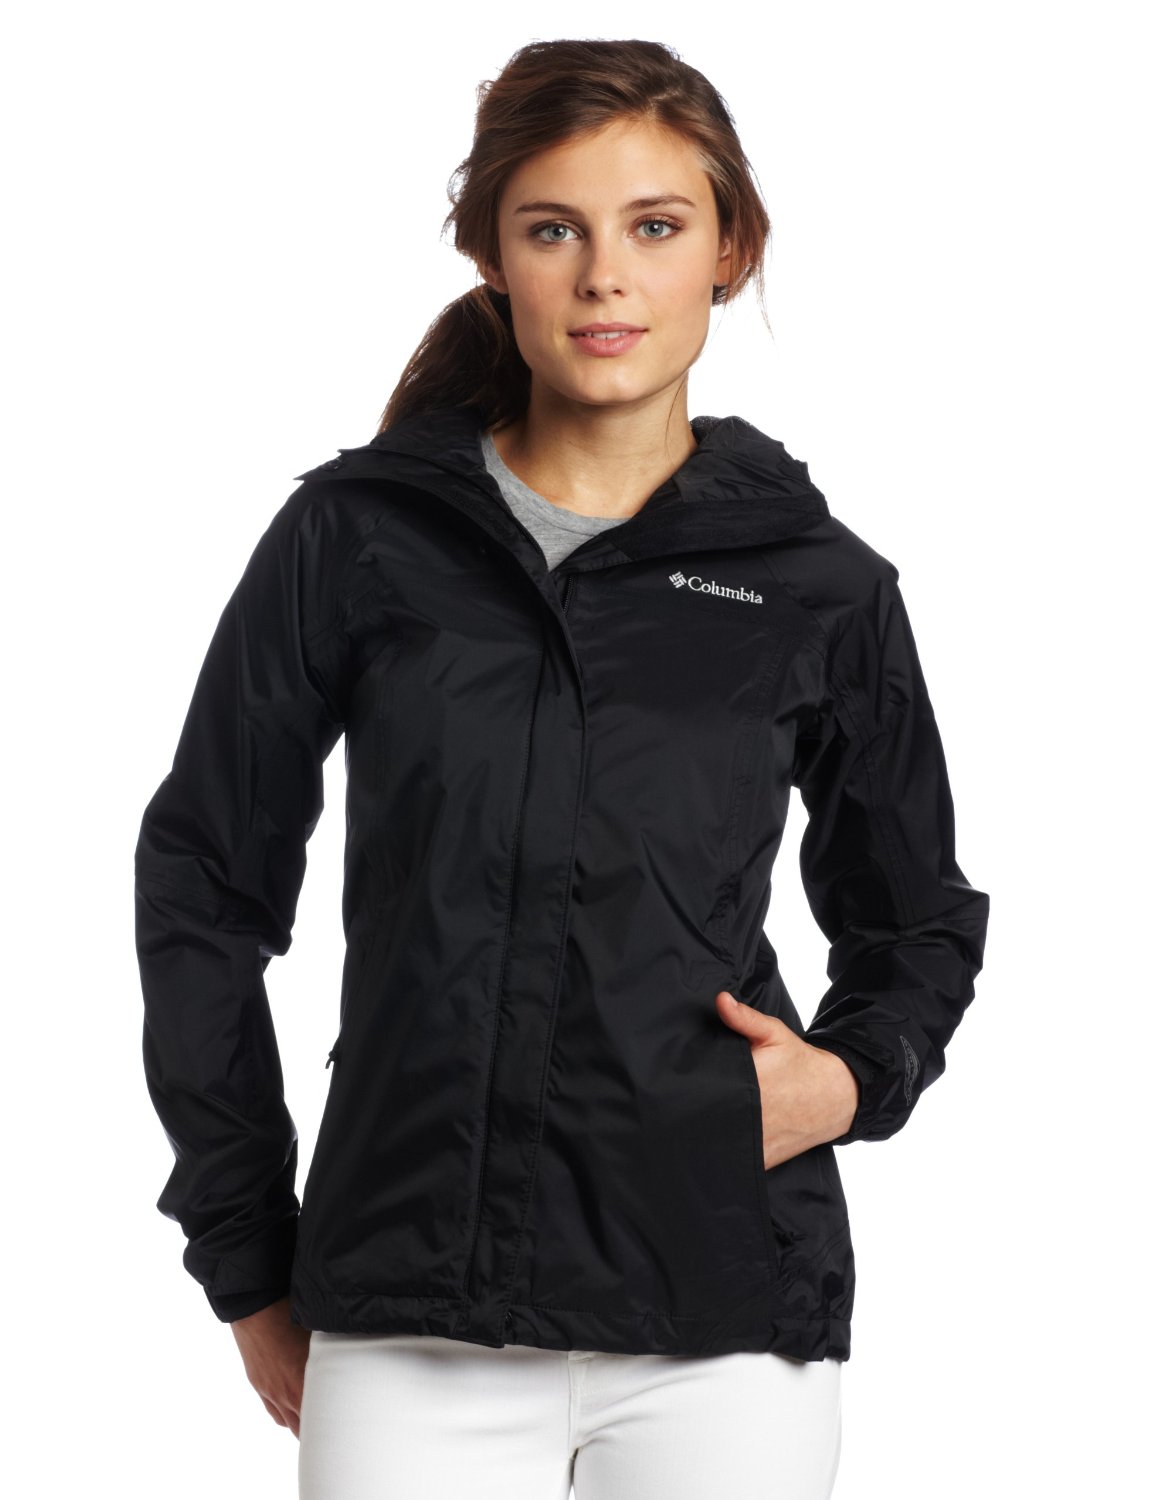 COLUMBIA WOMEN'S ARCADIA RAIN JACKET CHEAPEST PRICE SALE WITH FREE SHIPPING